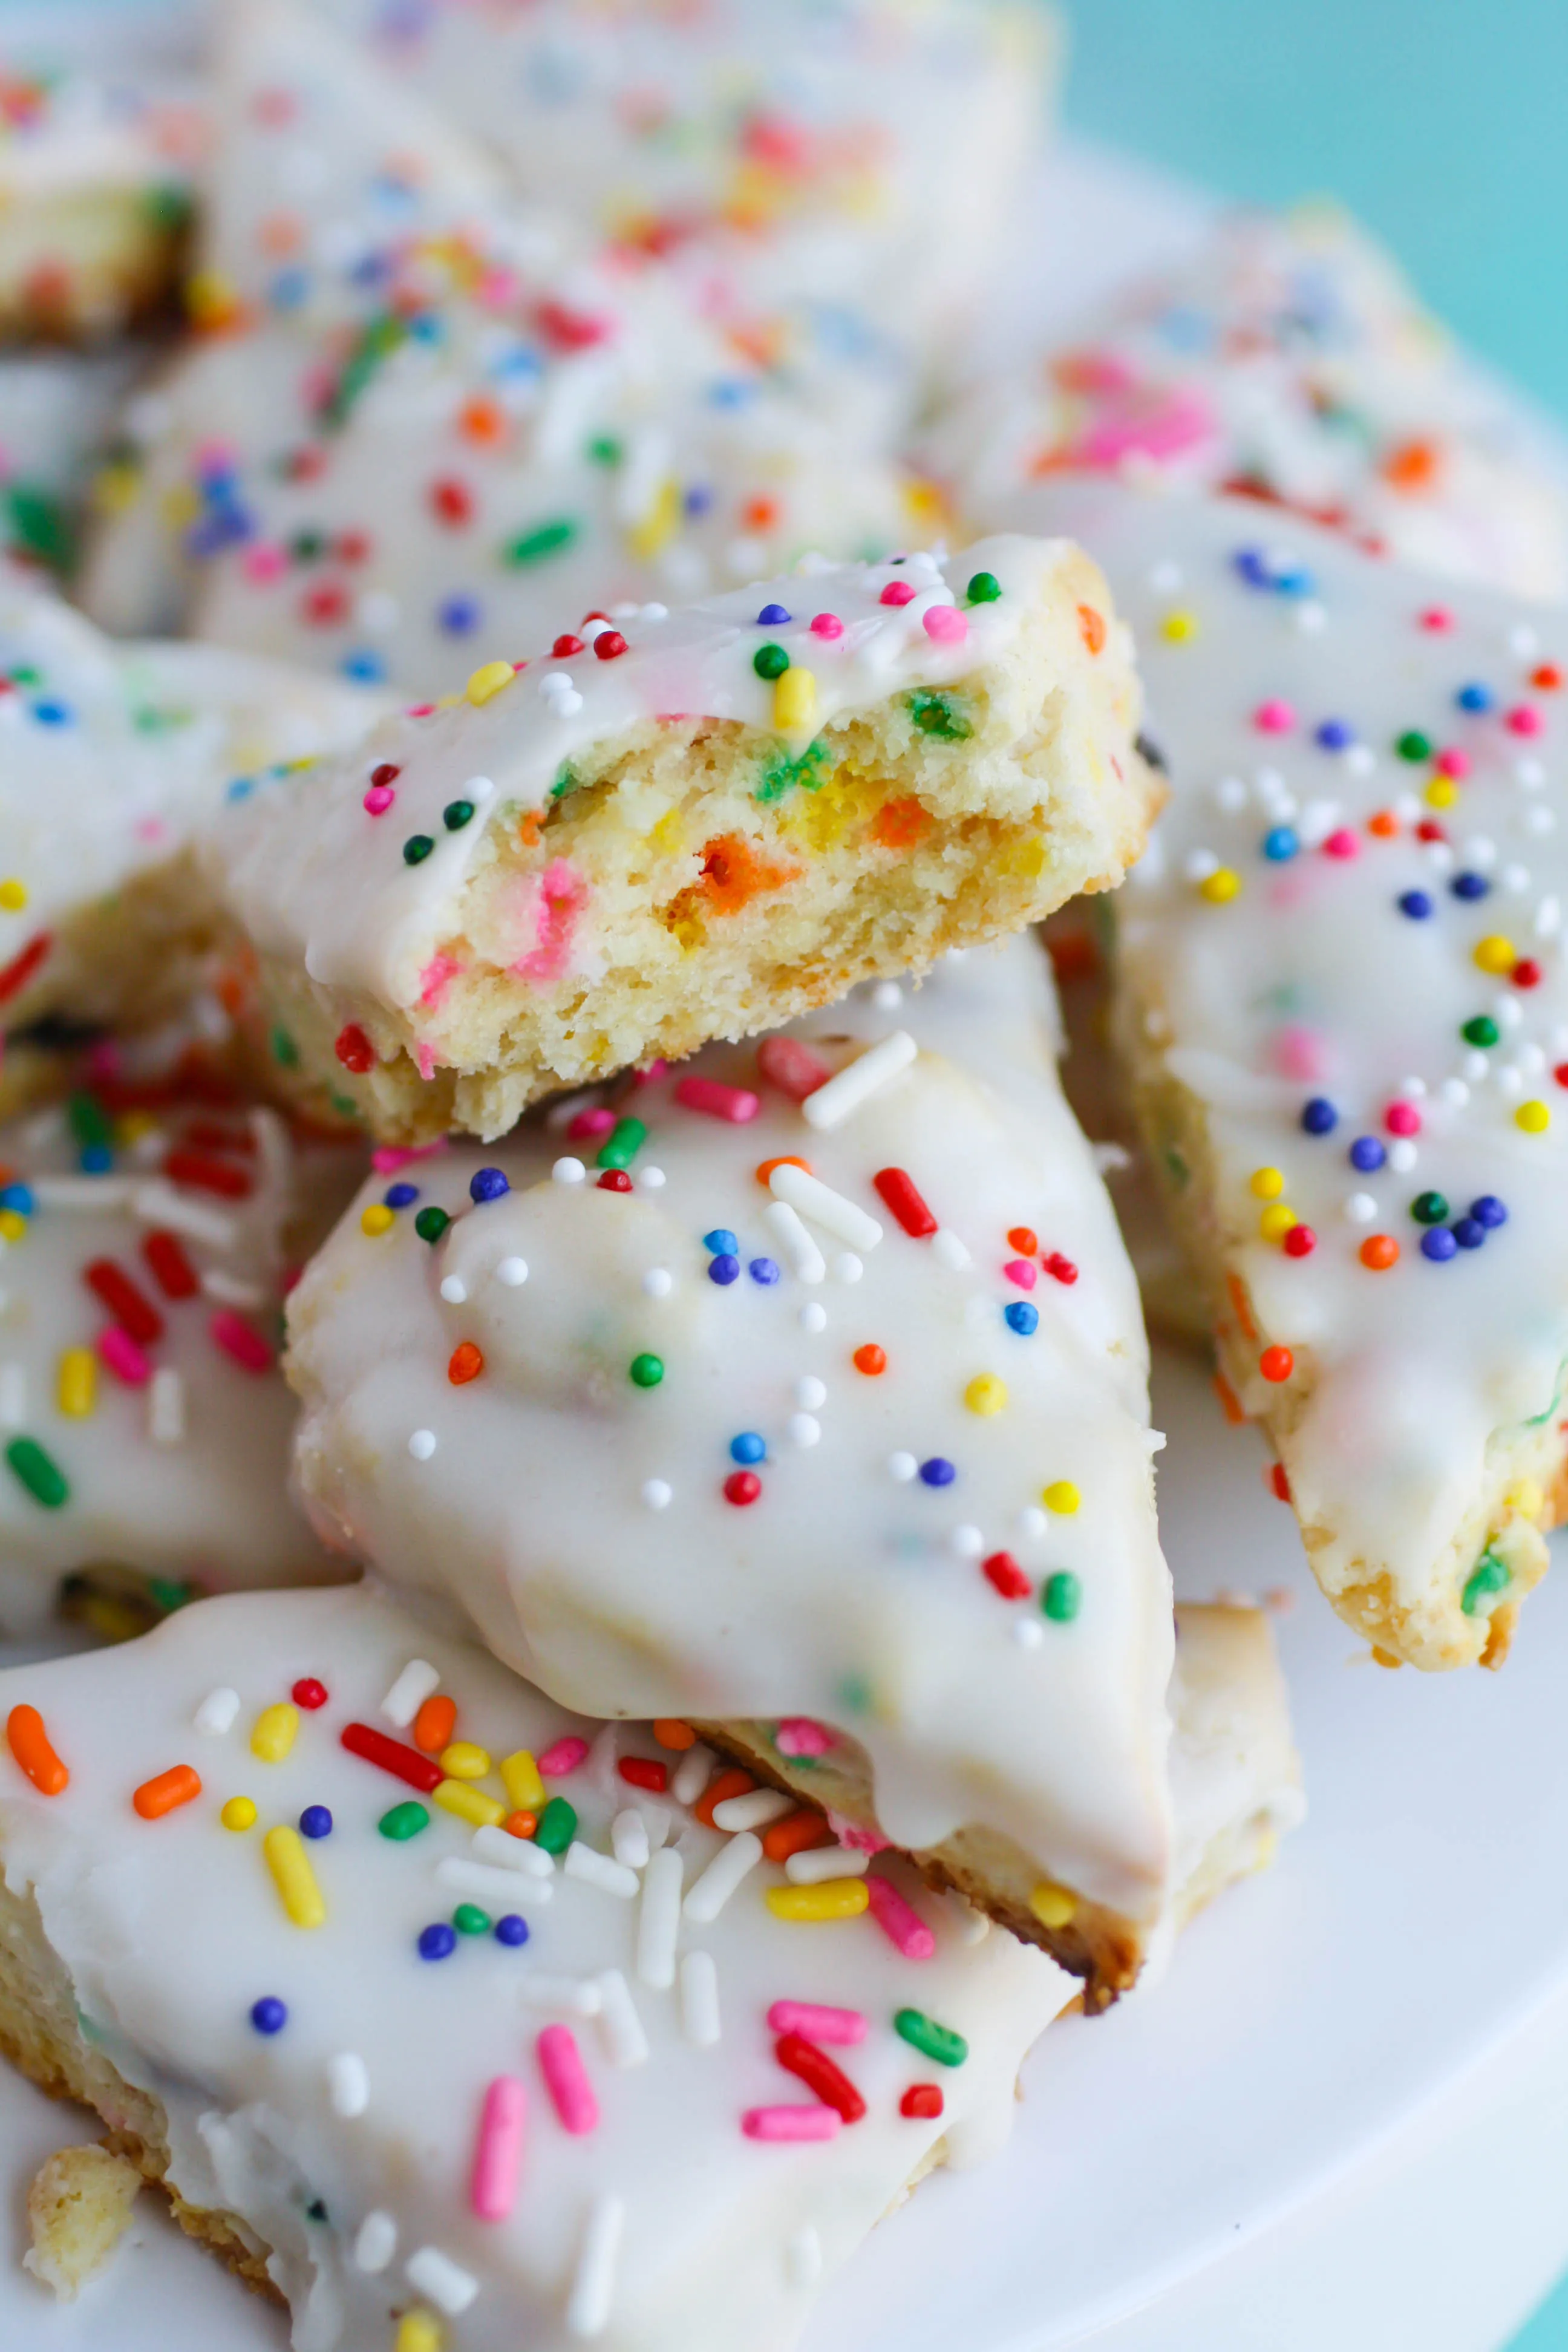 Mini Funfetti Scones are filled inside with sprinkles, and they're all over the tops, too. They are a fun dessert or treat for any occasion.